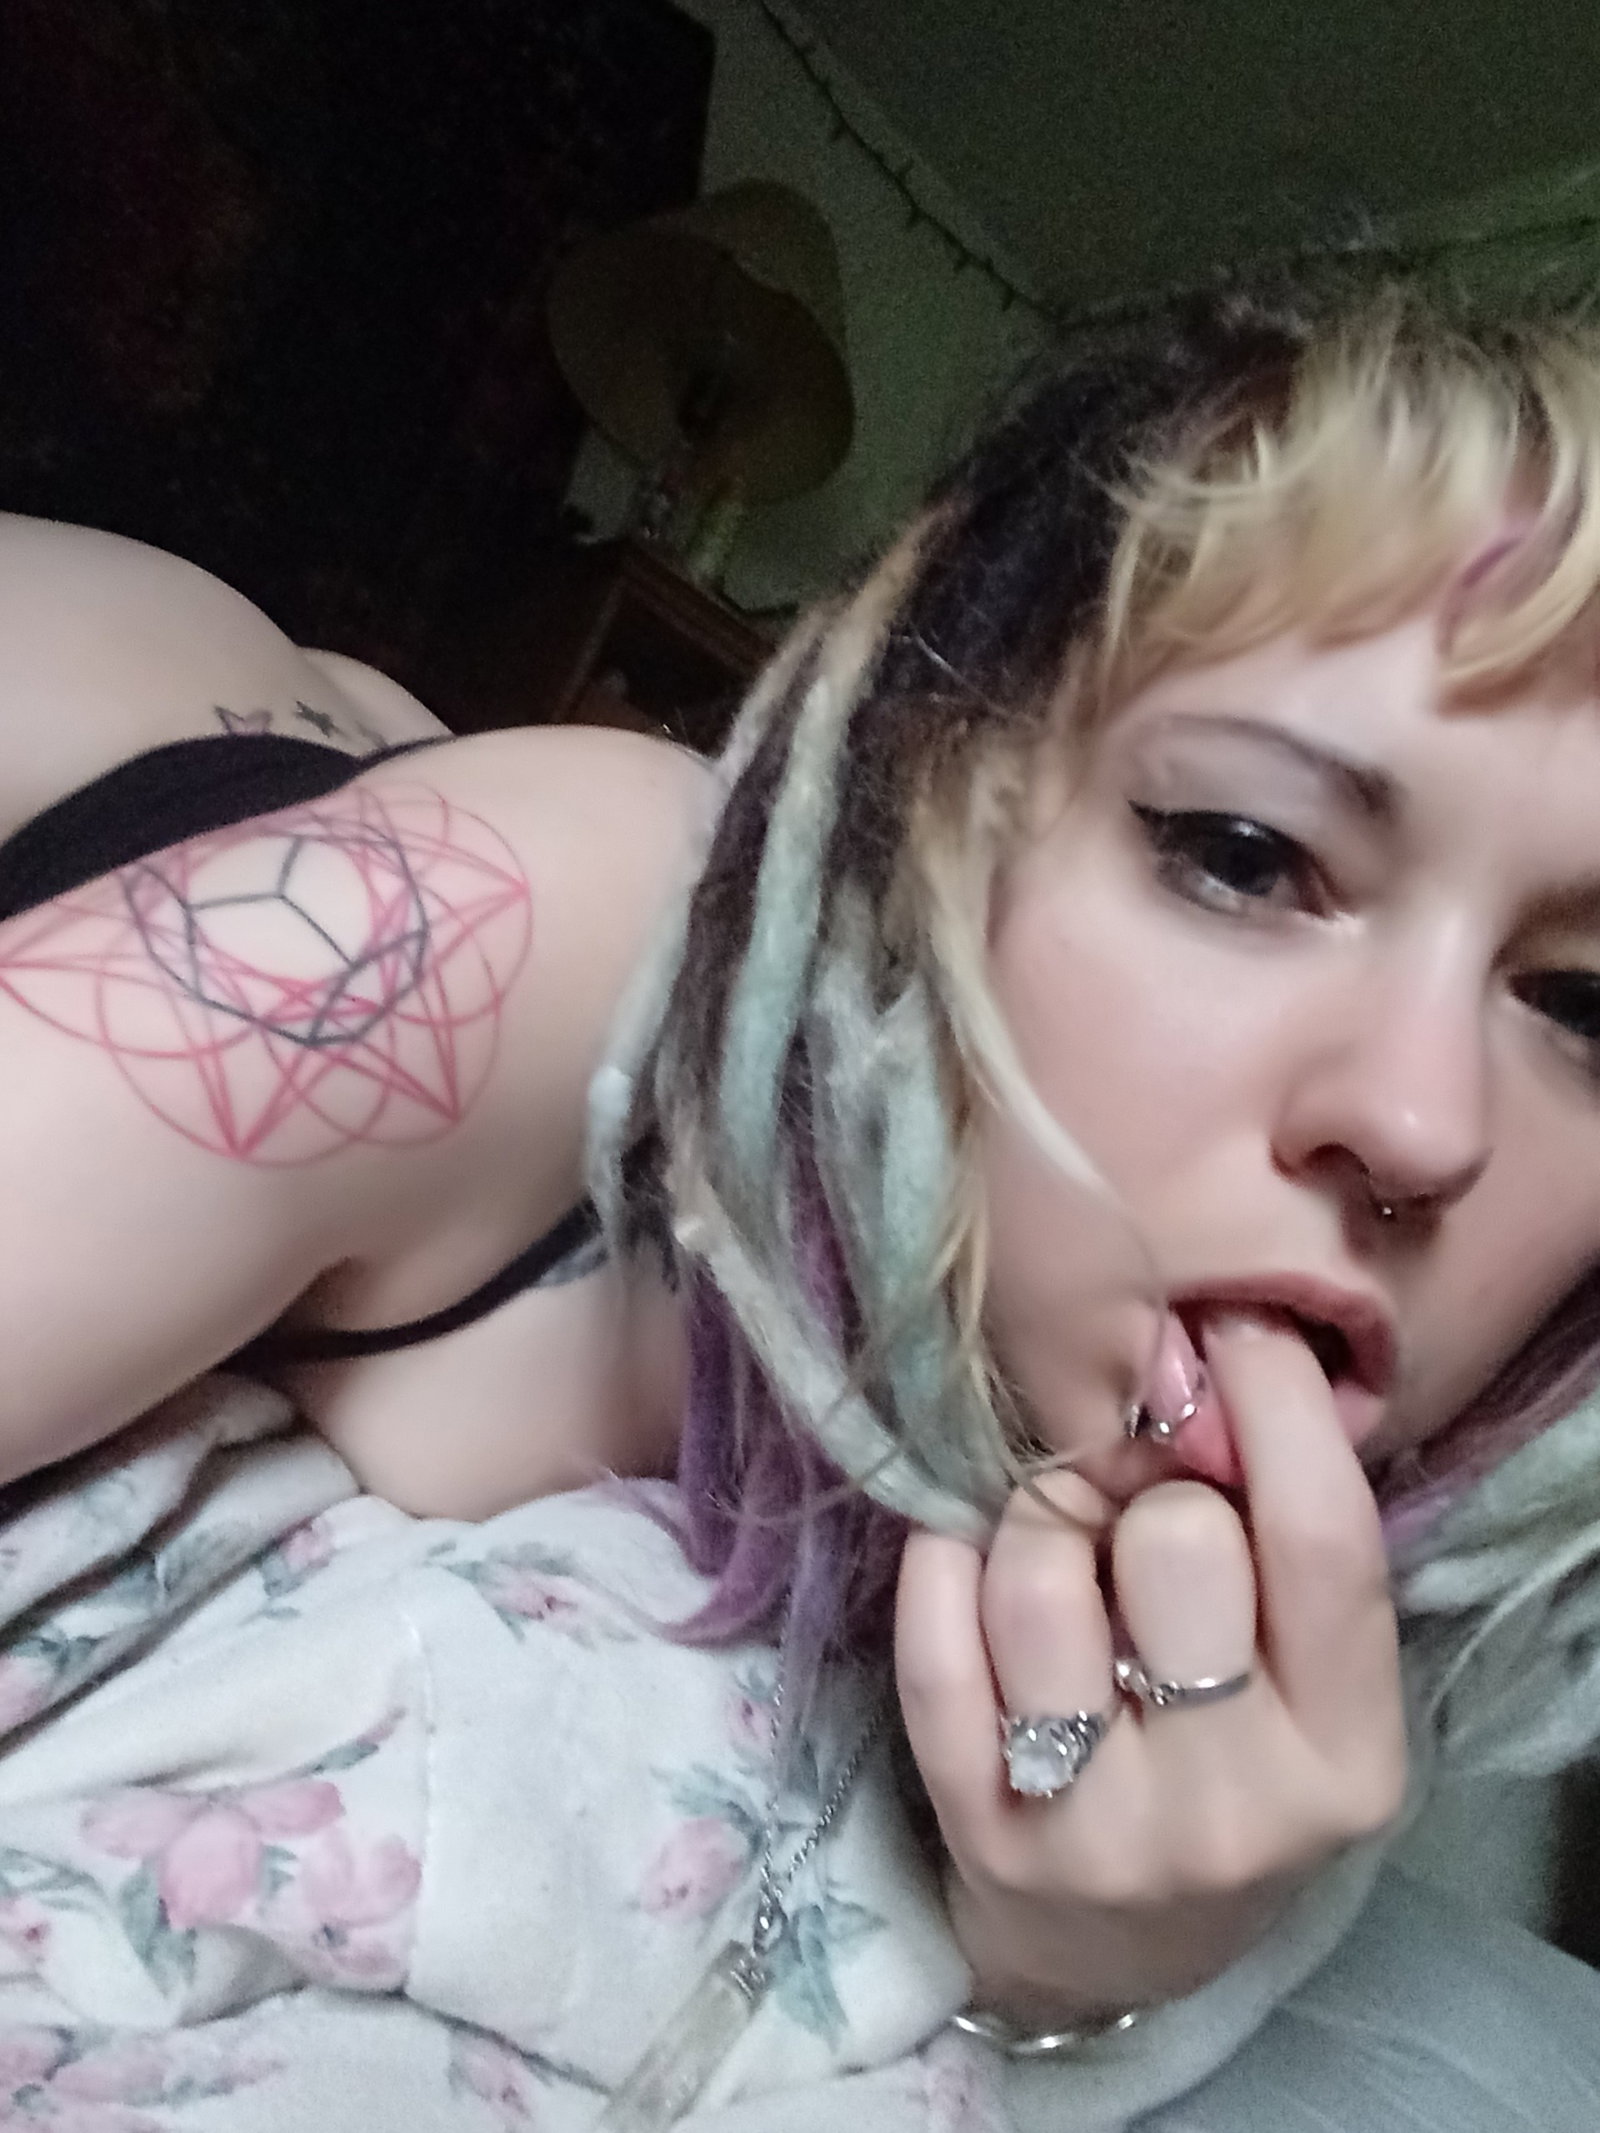 Photo by Princesskitten with the username @Princesskitten, who is a star user,  May 4, 2019 at 12:38 PM. The post is about the topic Hot Goth Girlfriend and the text says 'Waking up horny and alone likeee'